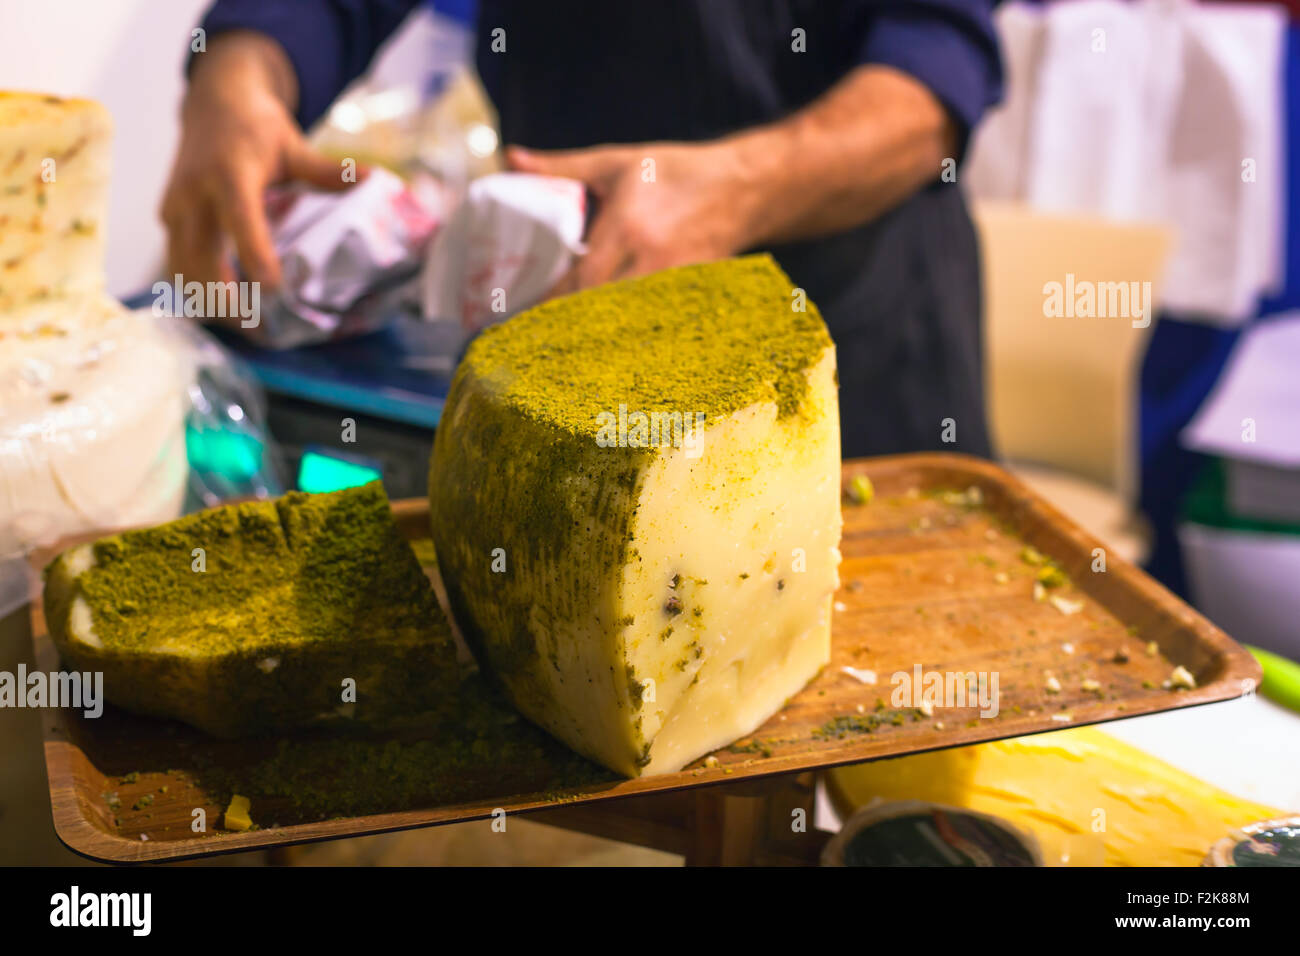 Sicilian cheese dressed with pistachio nuts grind Stock Photo